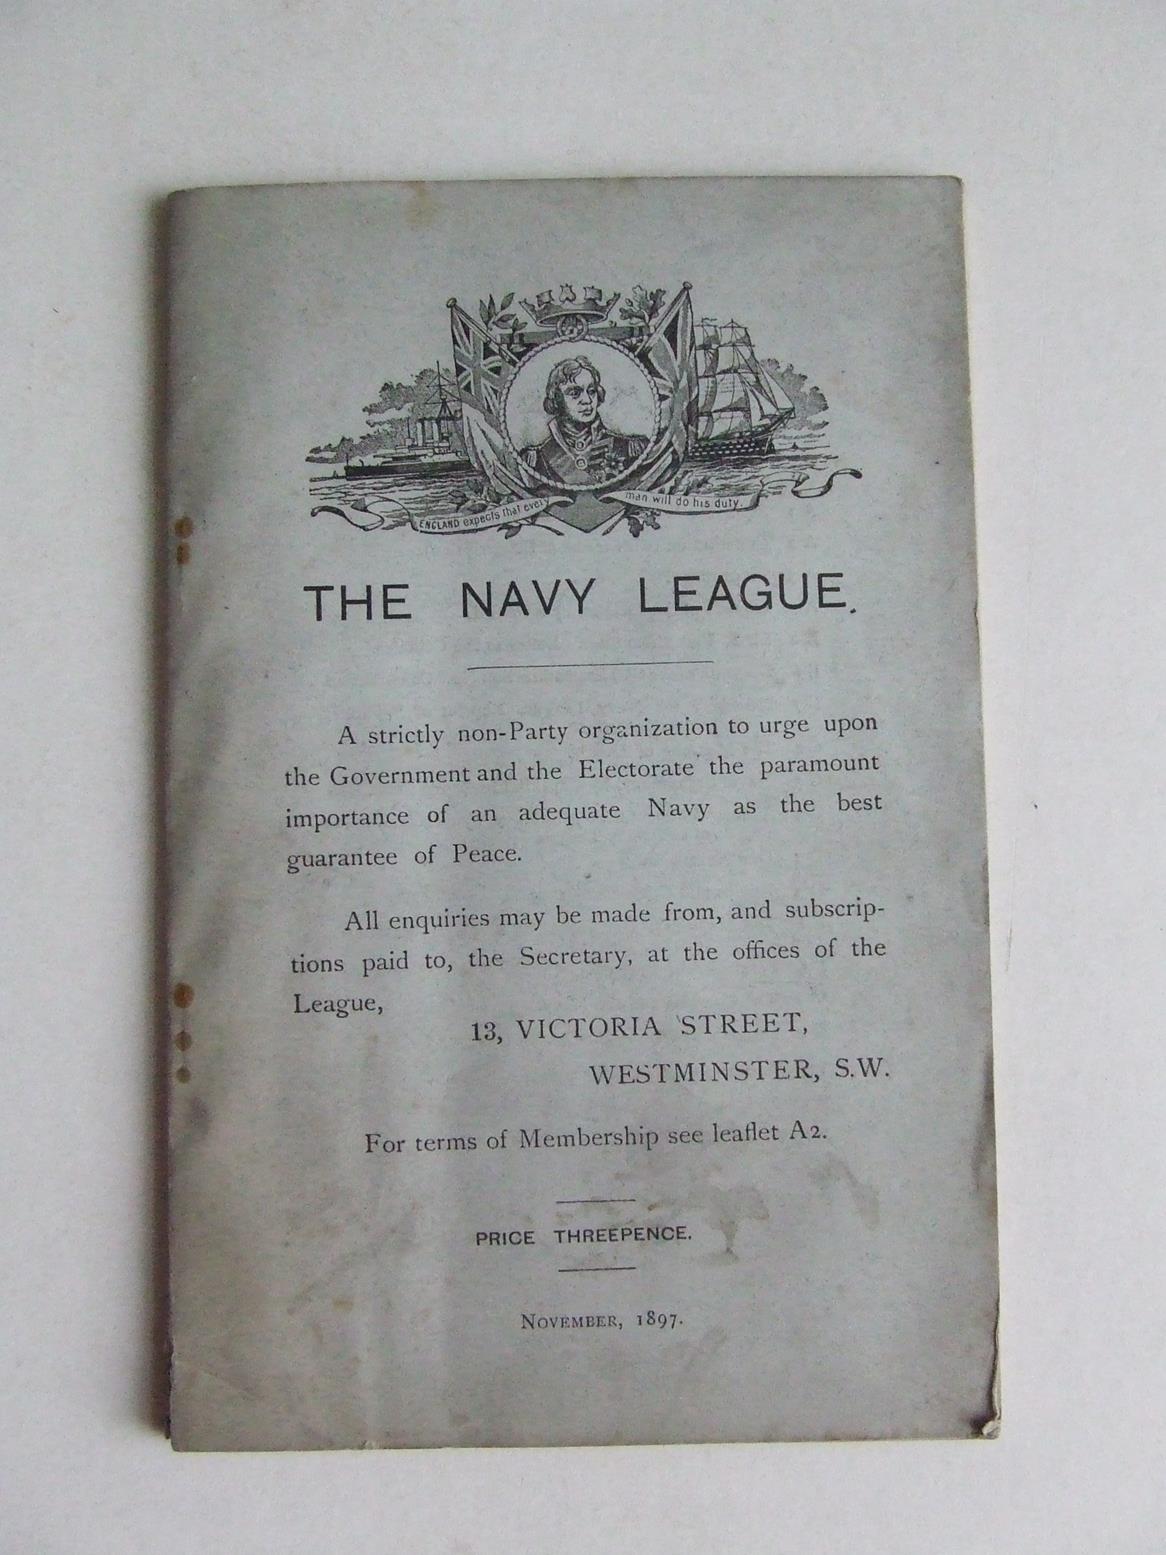 The Navy League - bound volume of leaflets